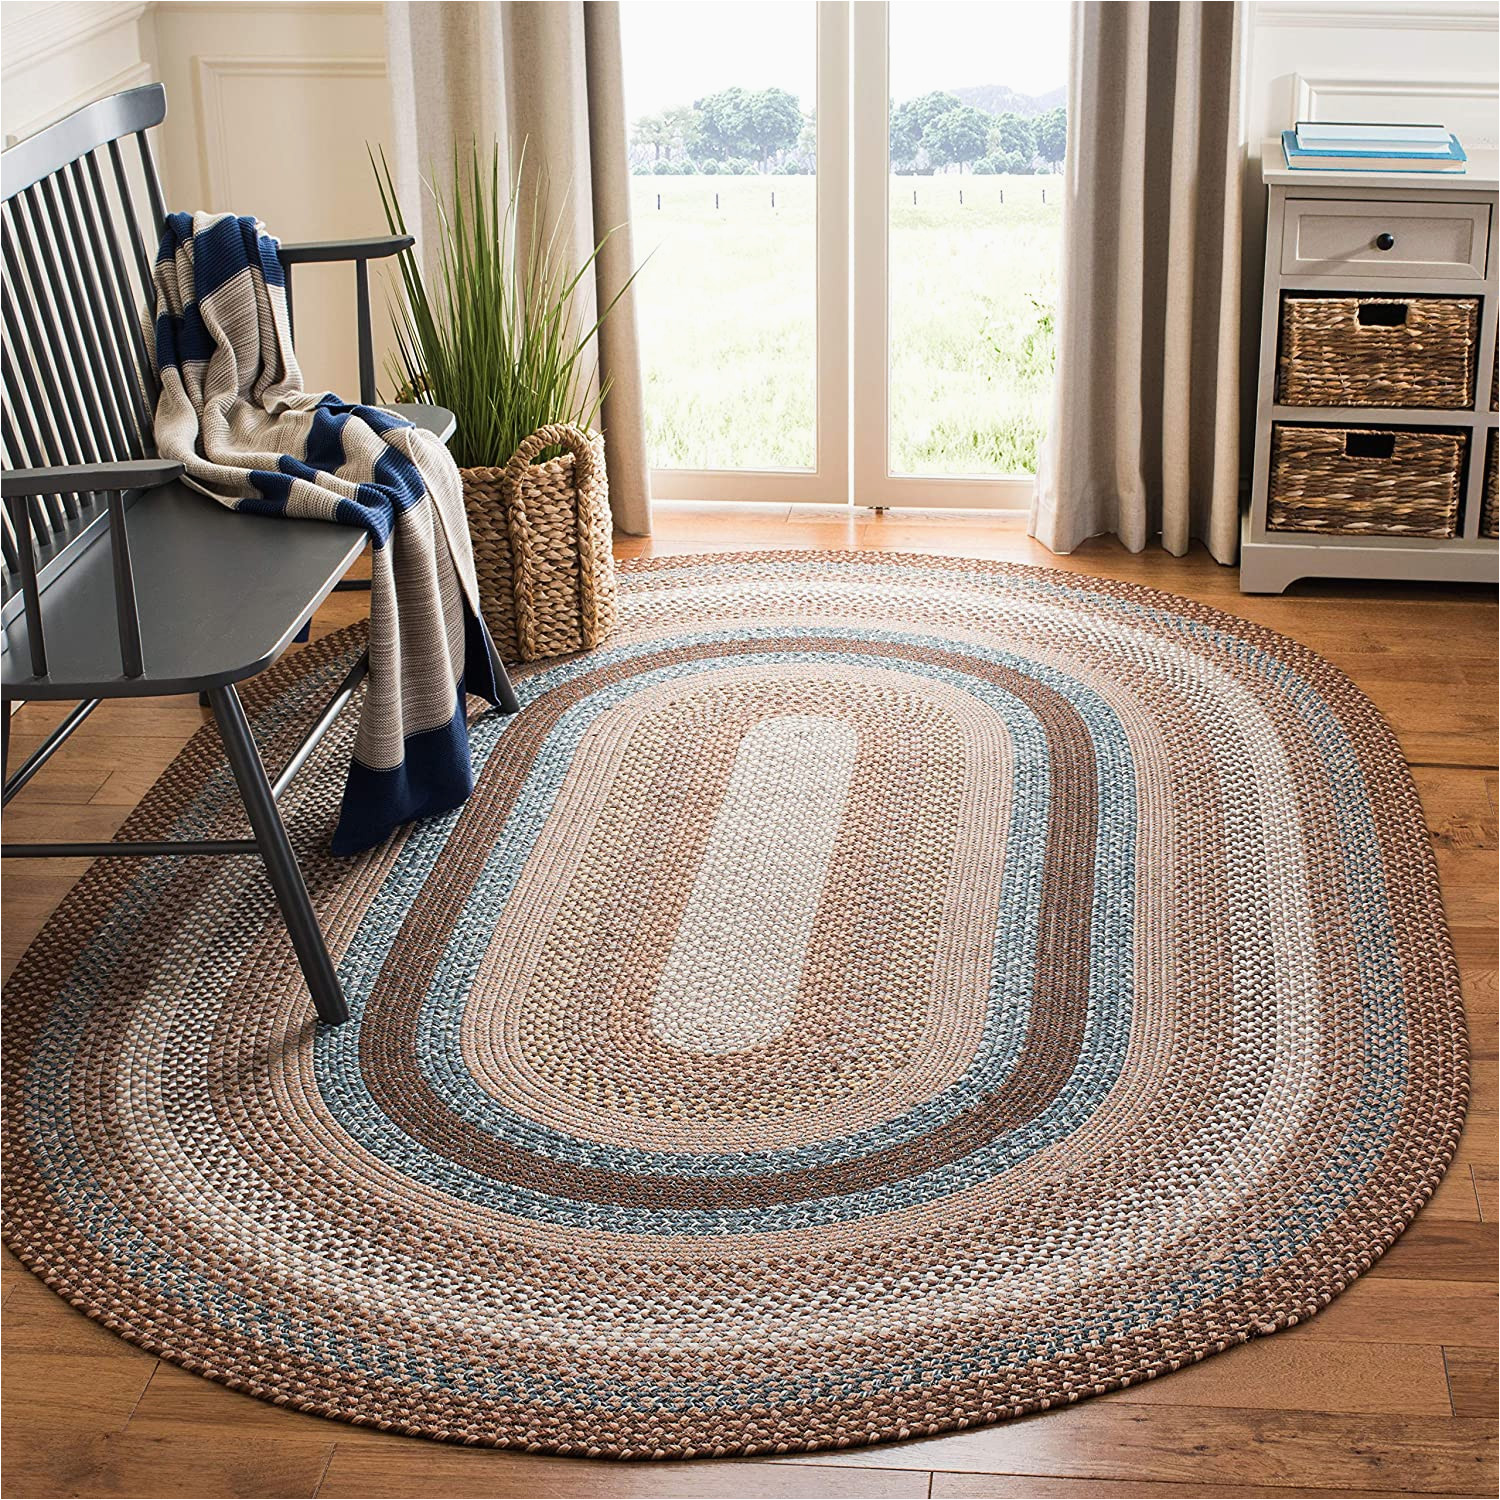 Large Oval Braided area Rugs Safavieh Braided Collection Brd313a Handmade Country Cottage Reversible area Rug, 8′ X 10′ Oval, Brown / Multi